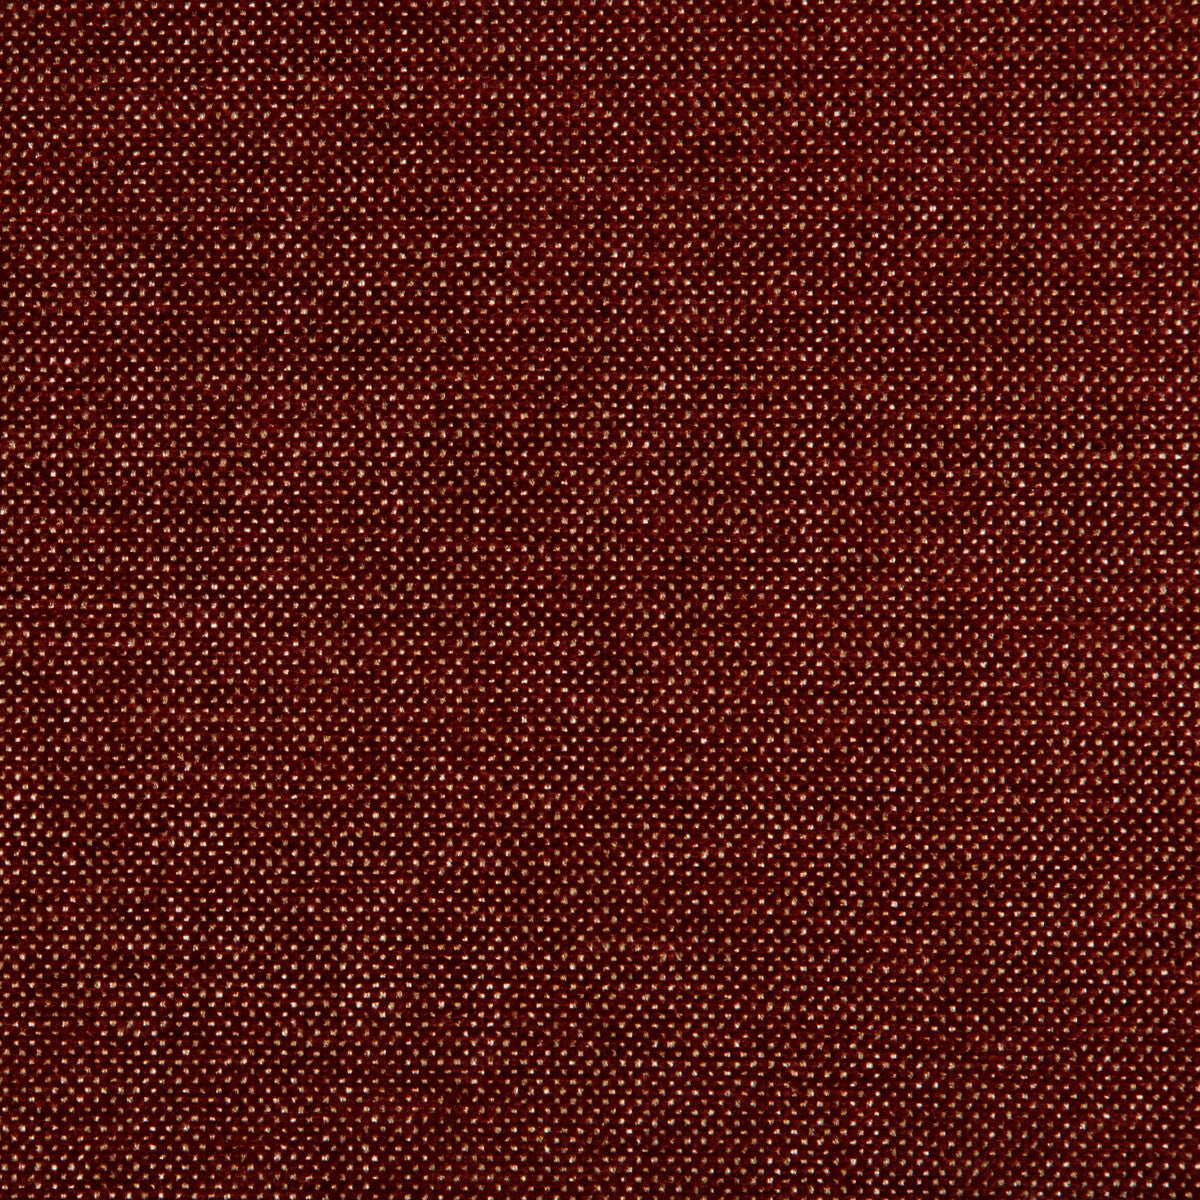 Kravet Smart fabric in 35393-9 color - pattern 35393.9.0 - by Kravet Smart in the Performance Crypton Home collection